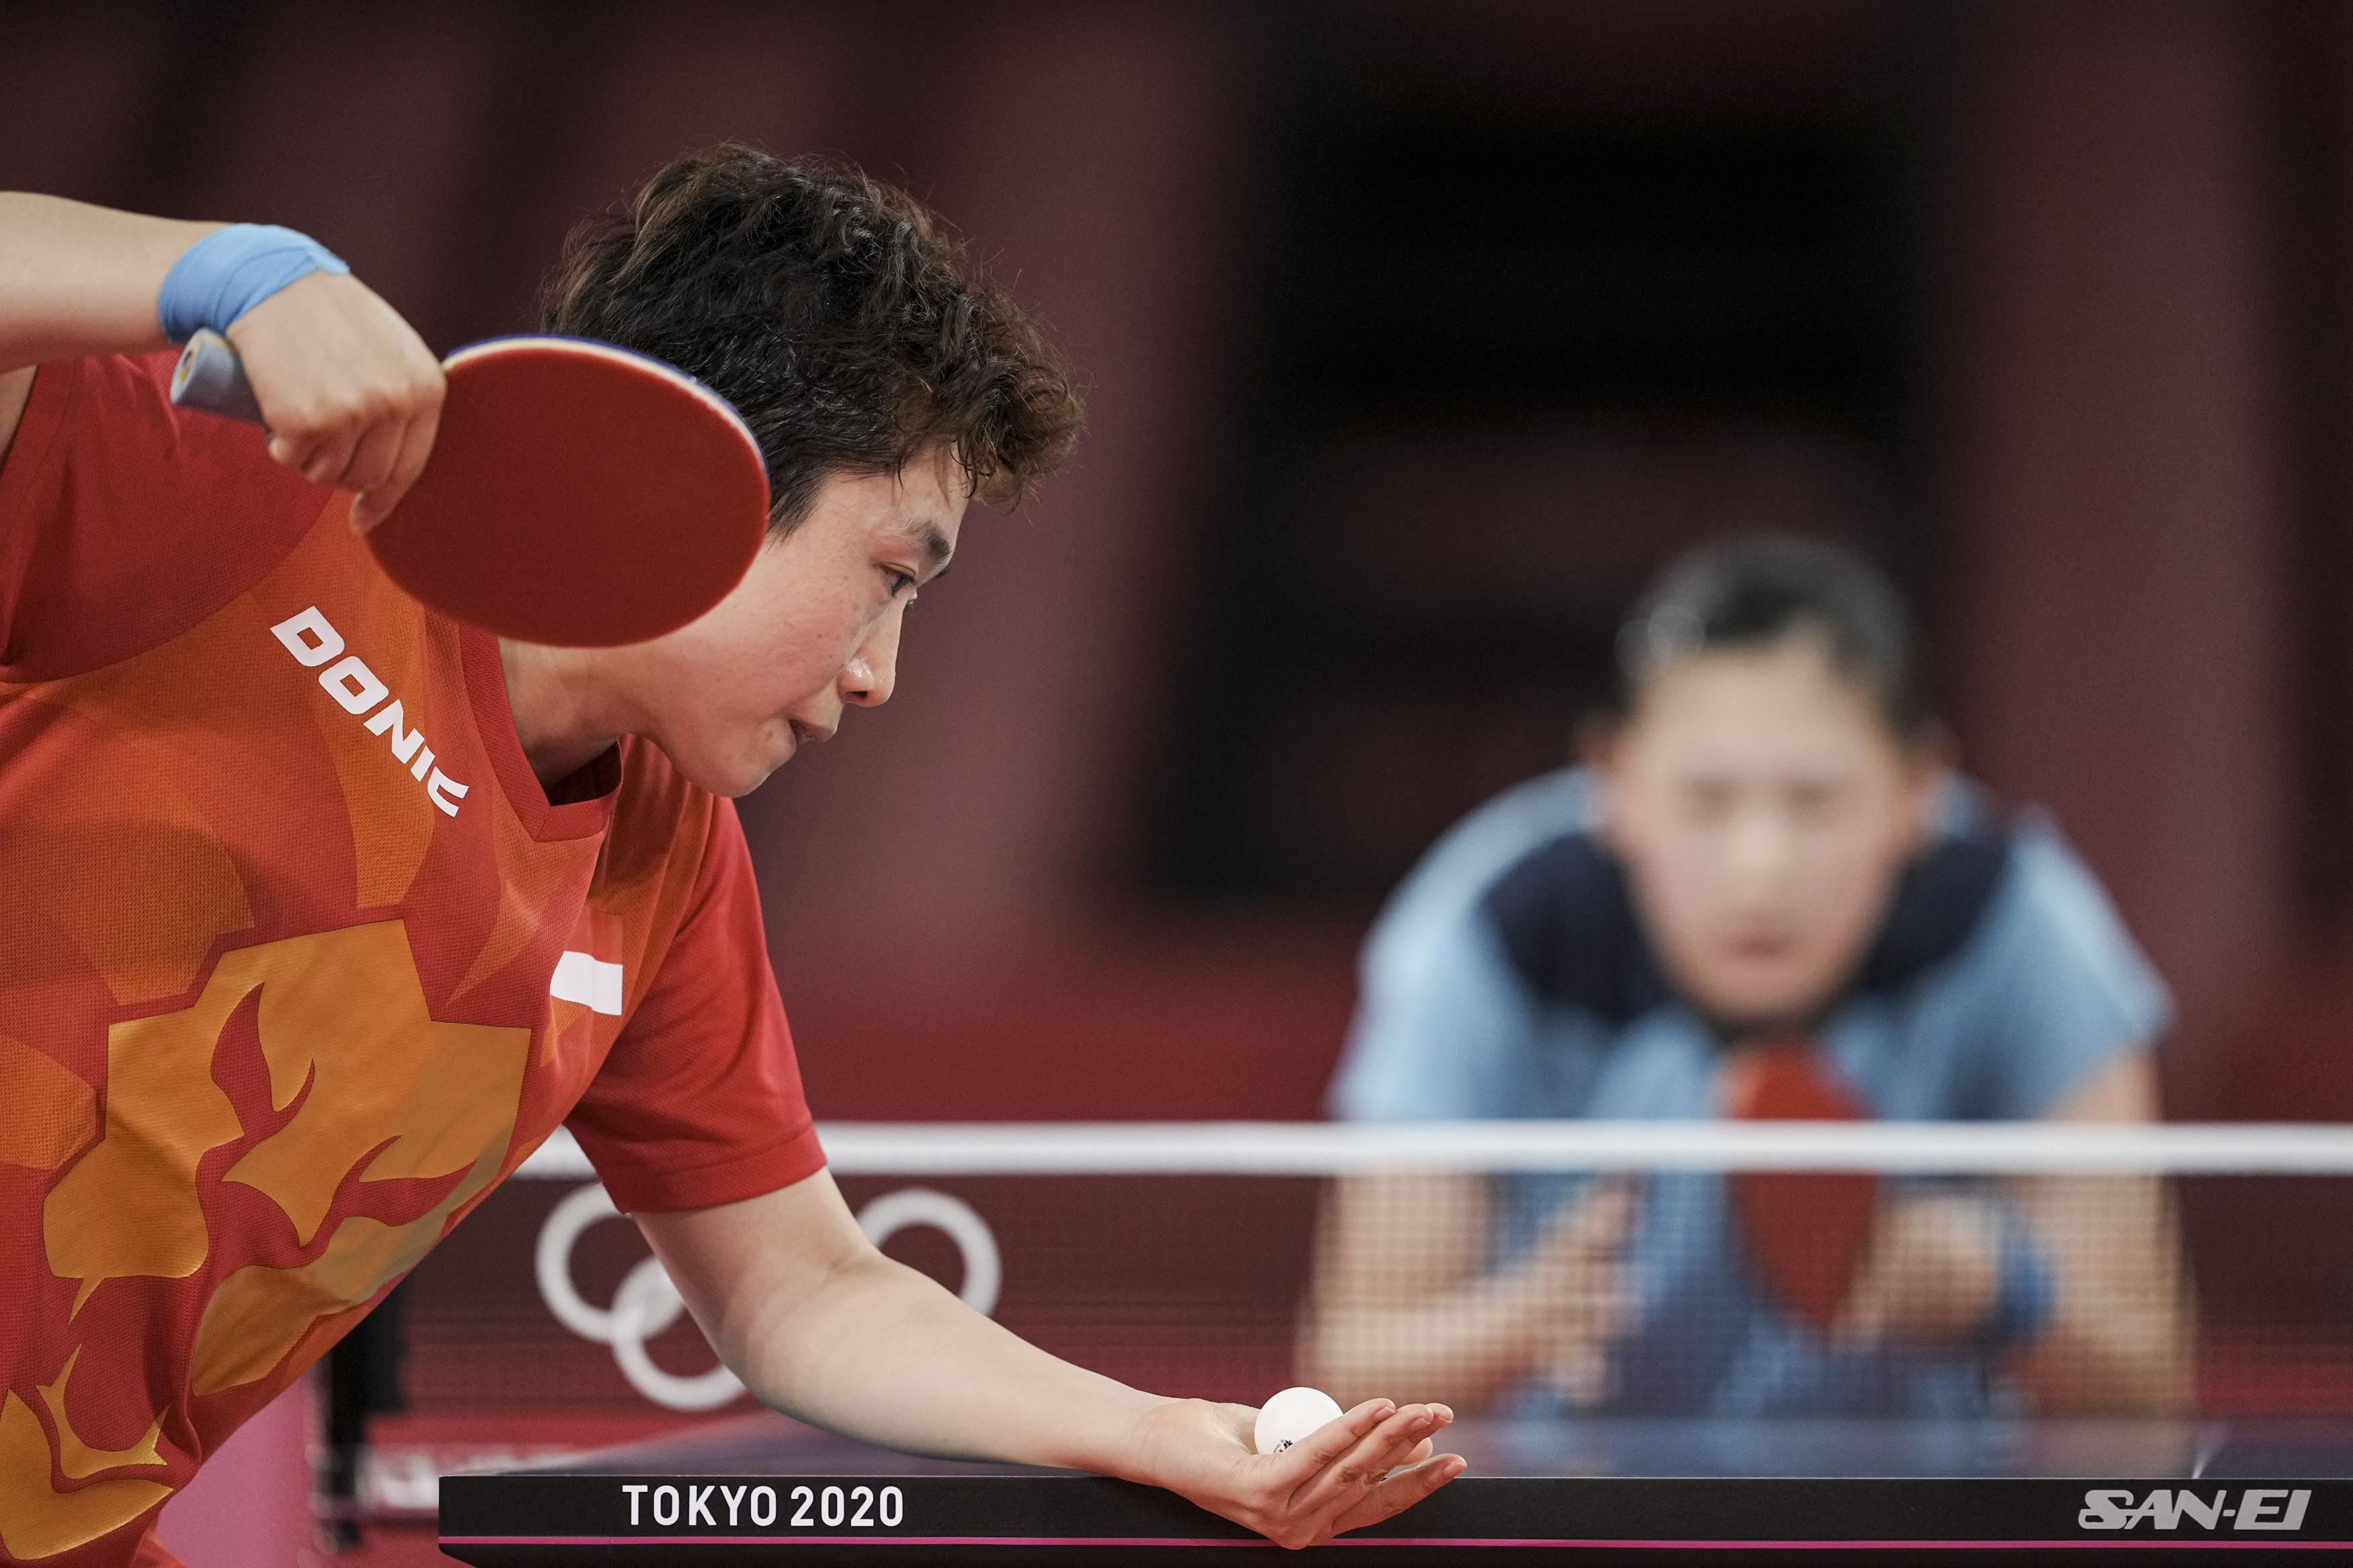 Tokyo 2020 : TeamSG Padder Feng Tianwei is just 1 step away from reaching Women's Singles QF stage!